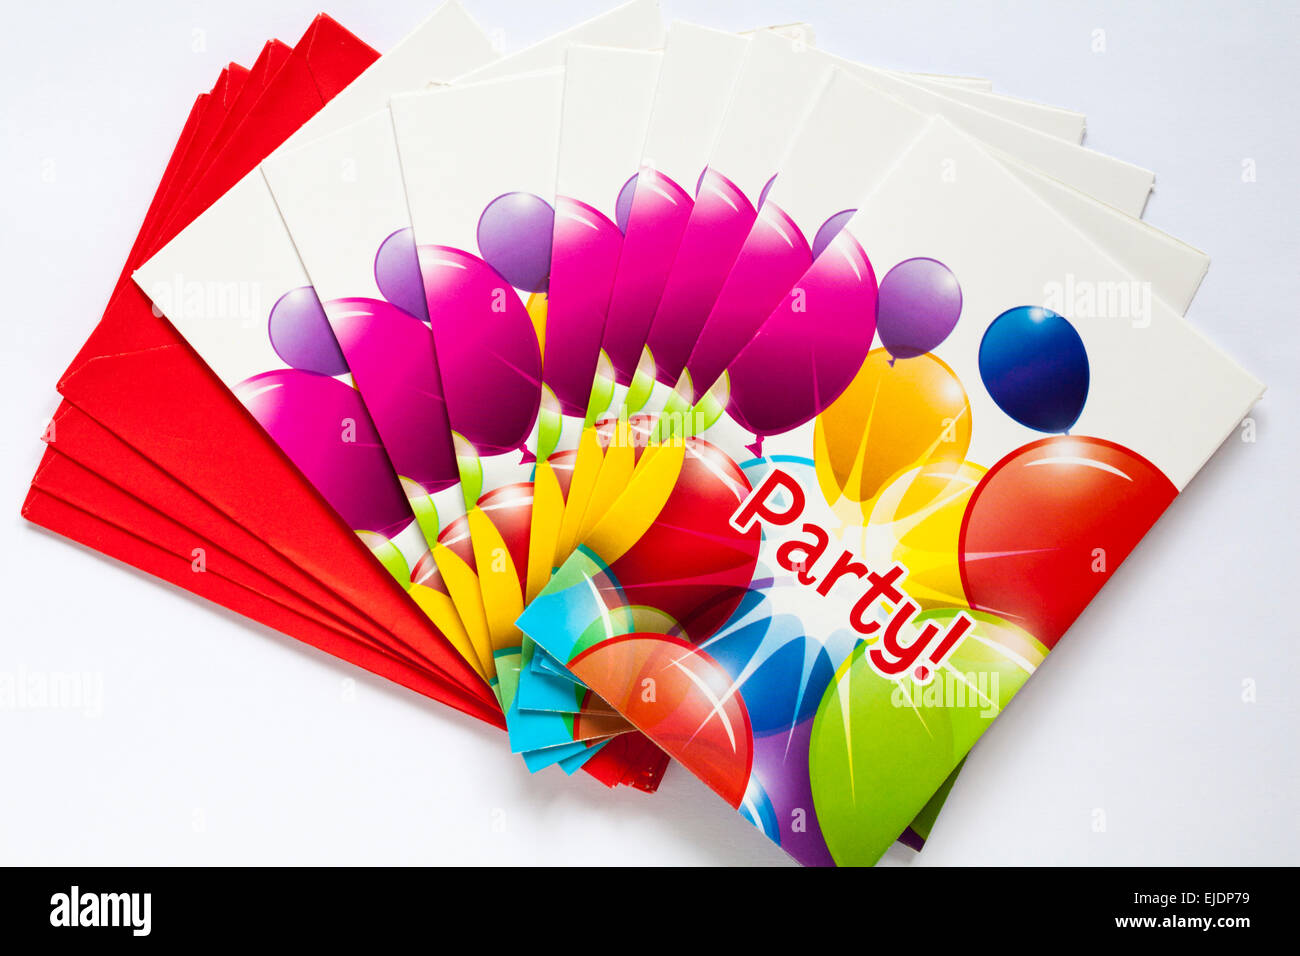 Party invitations with red envelopes set on white background Stock Photo